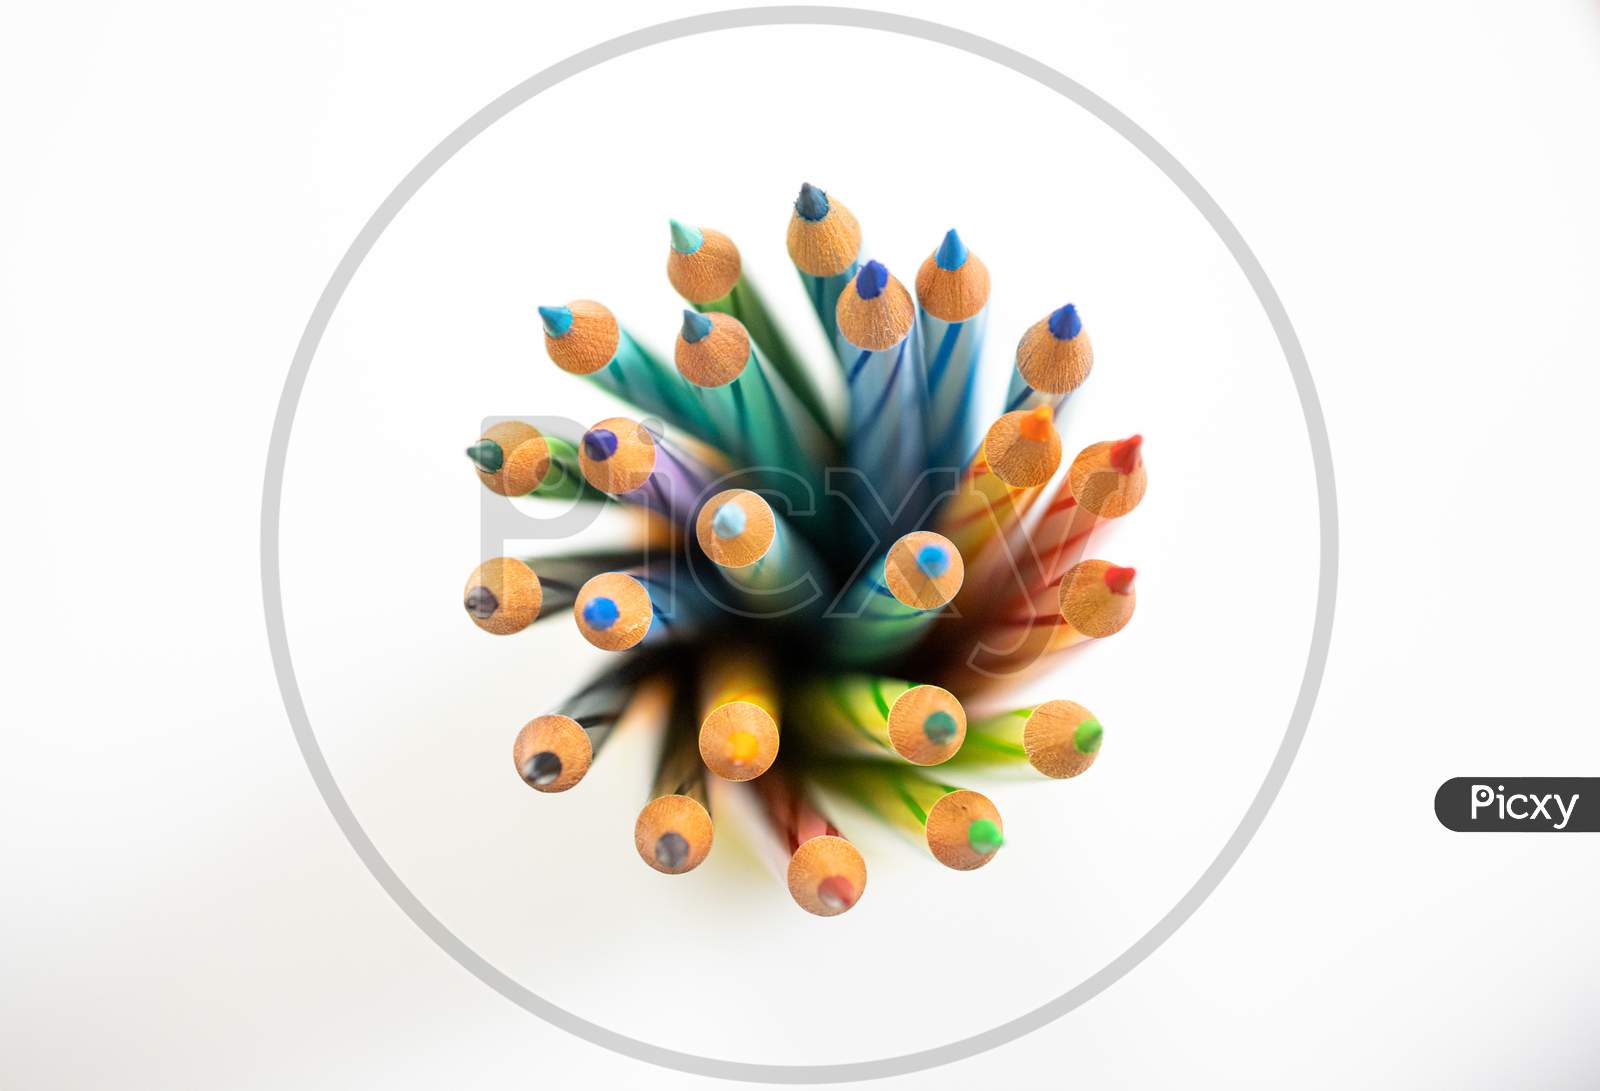 Color Pencils arranged in circular motion On white Background Showing Unity